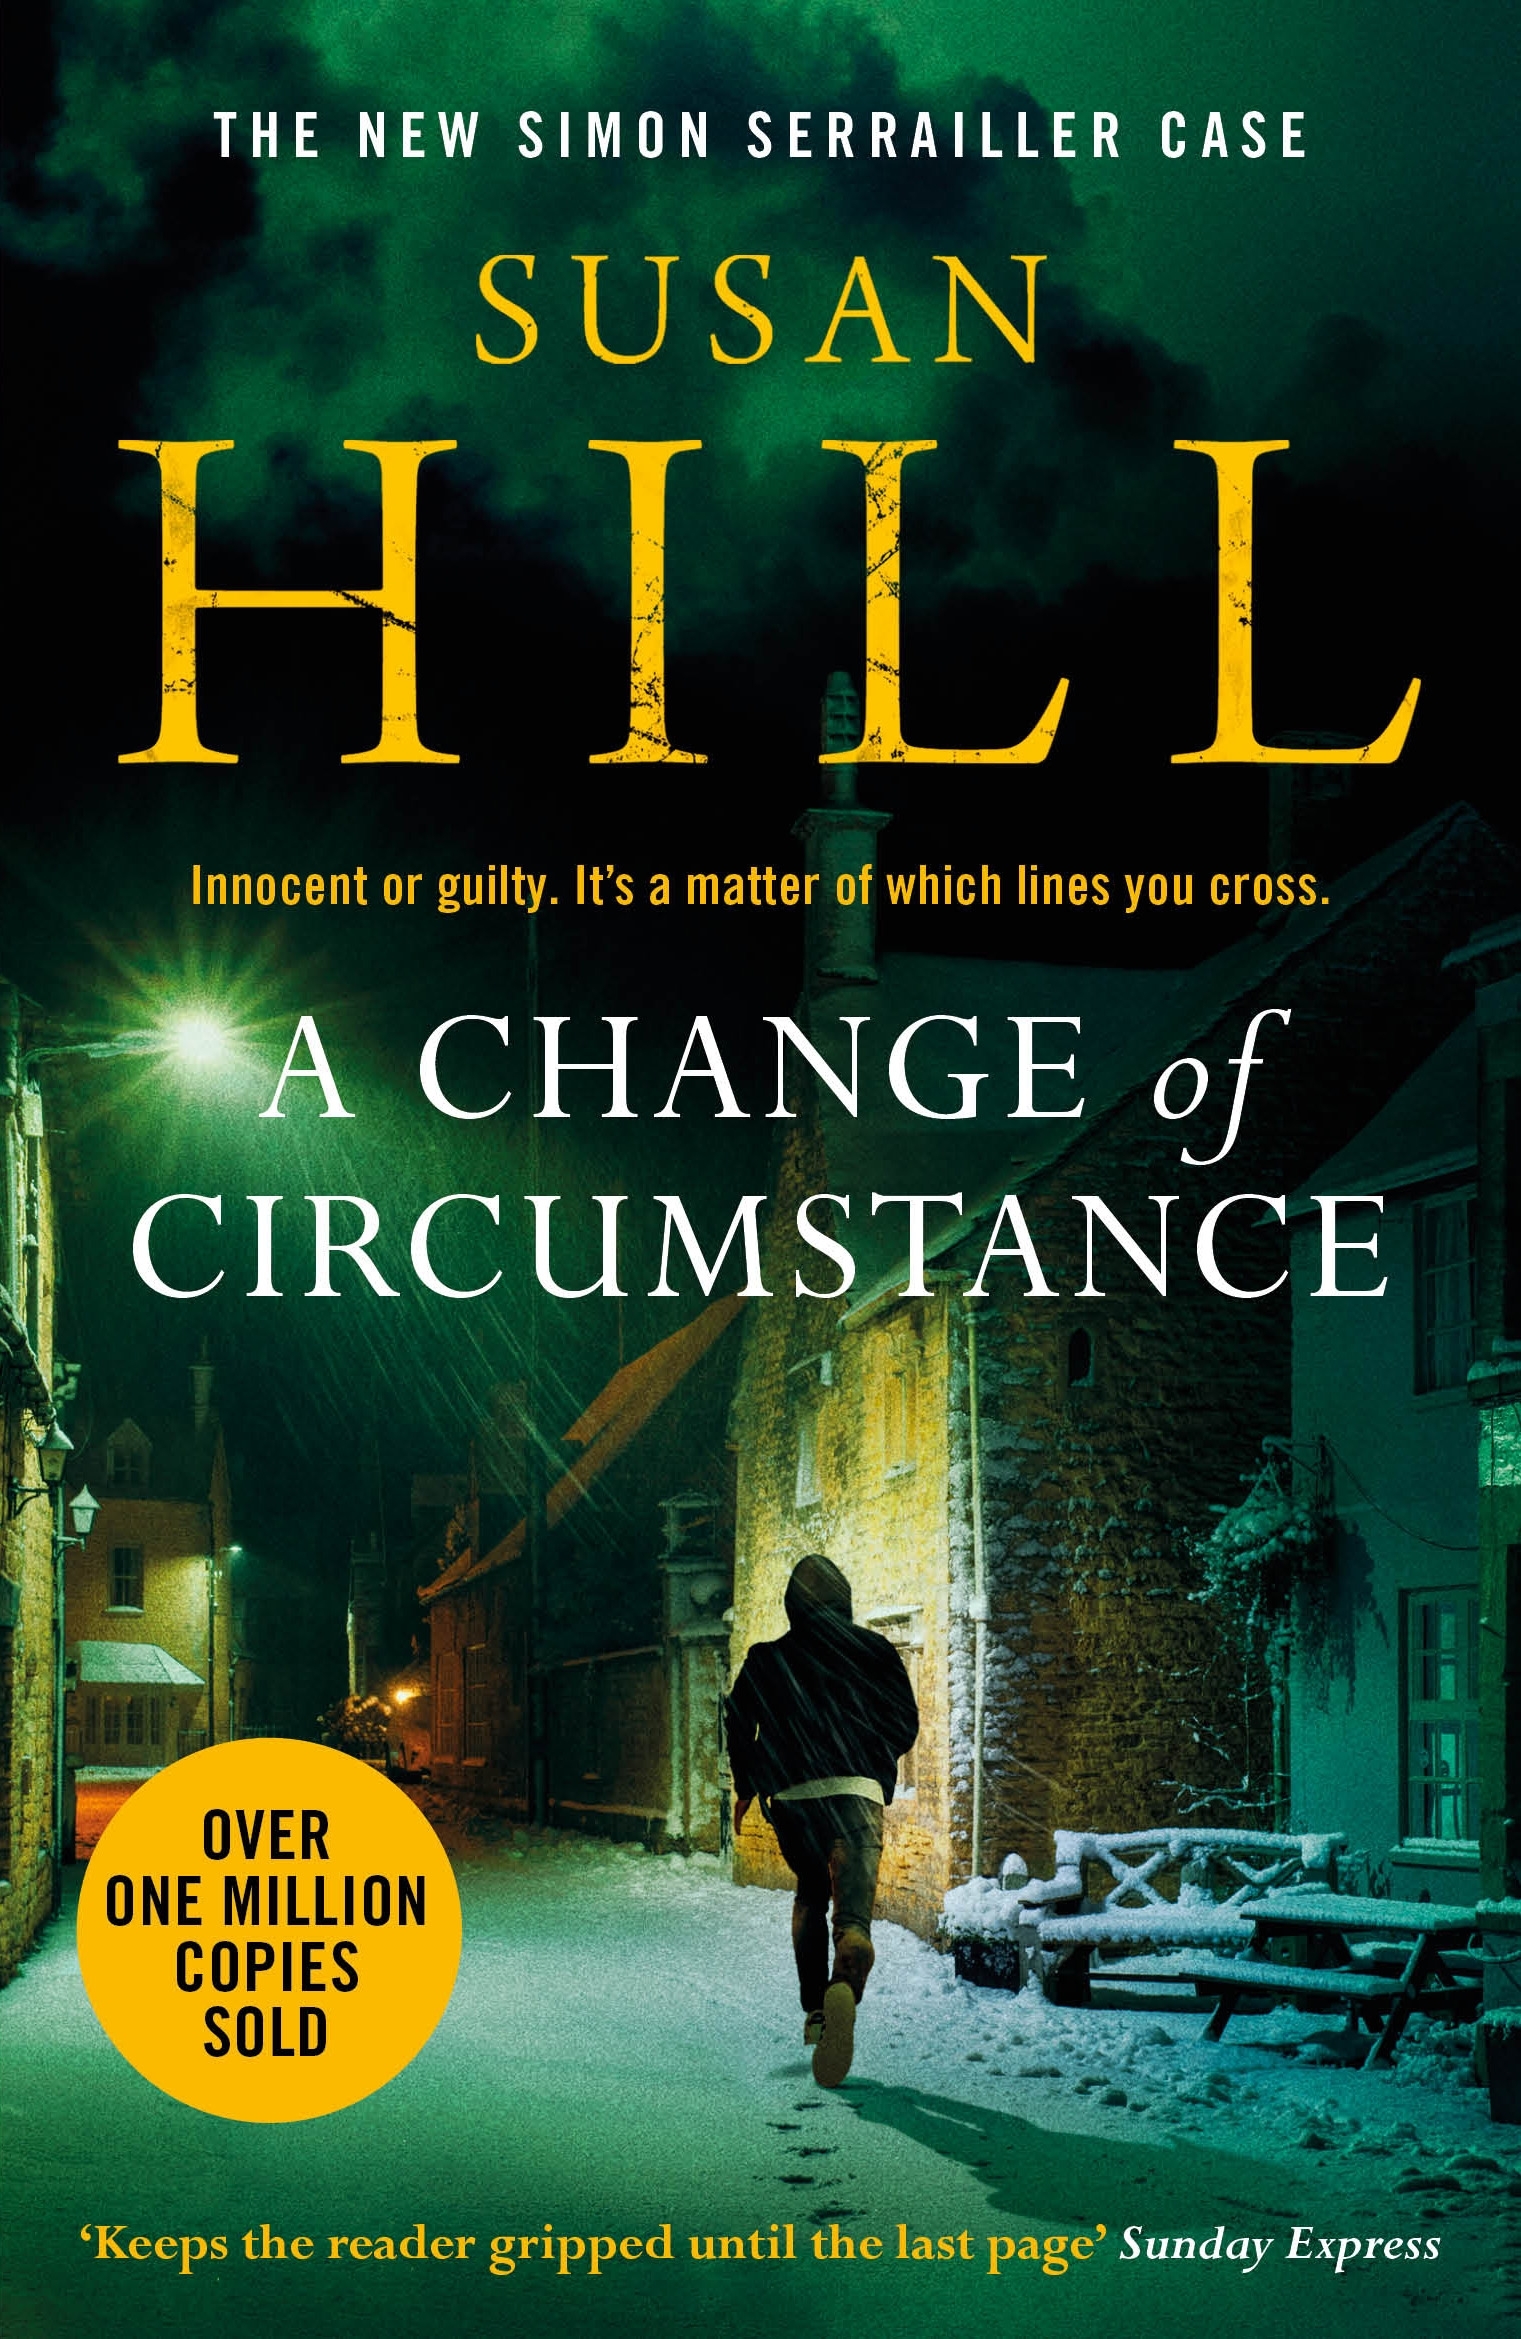 a-change-of-circumstance-by-susan-hill-penguin-books-new-zealand